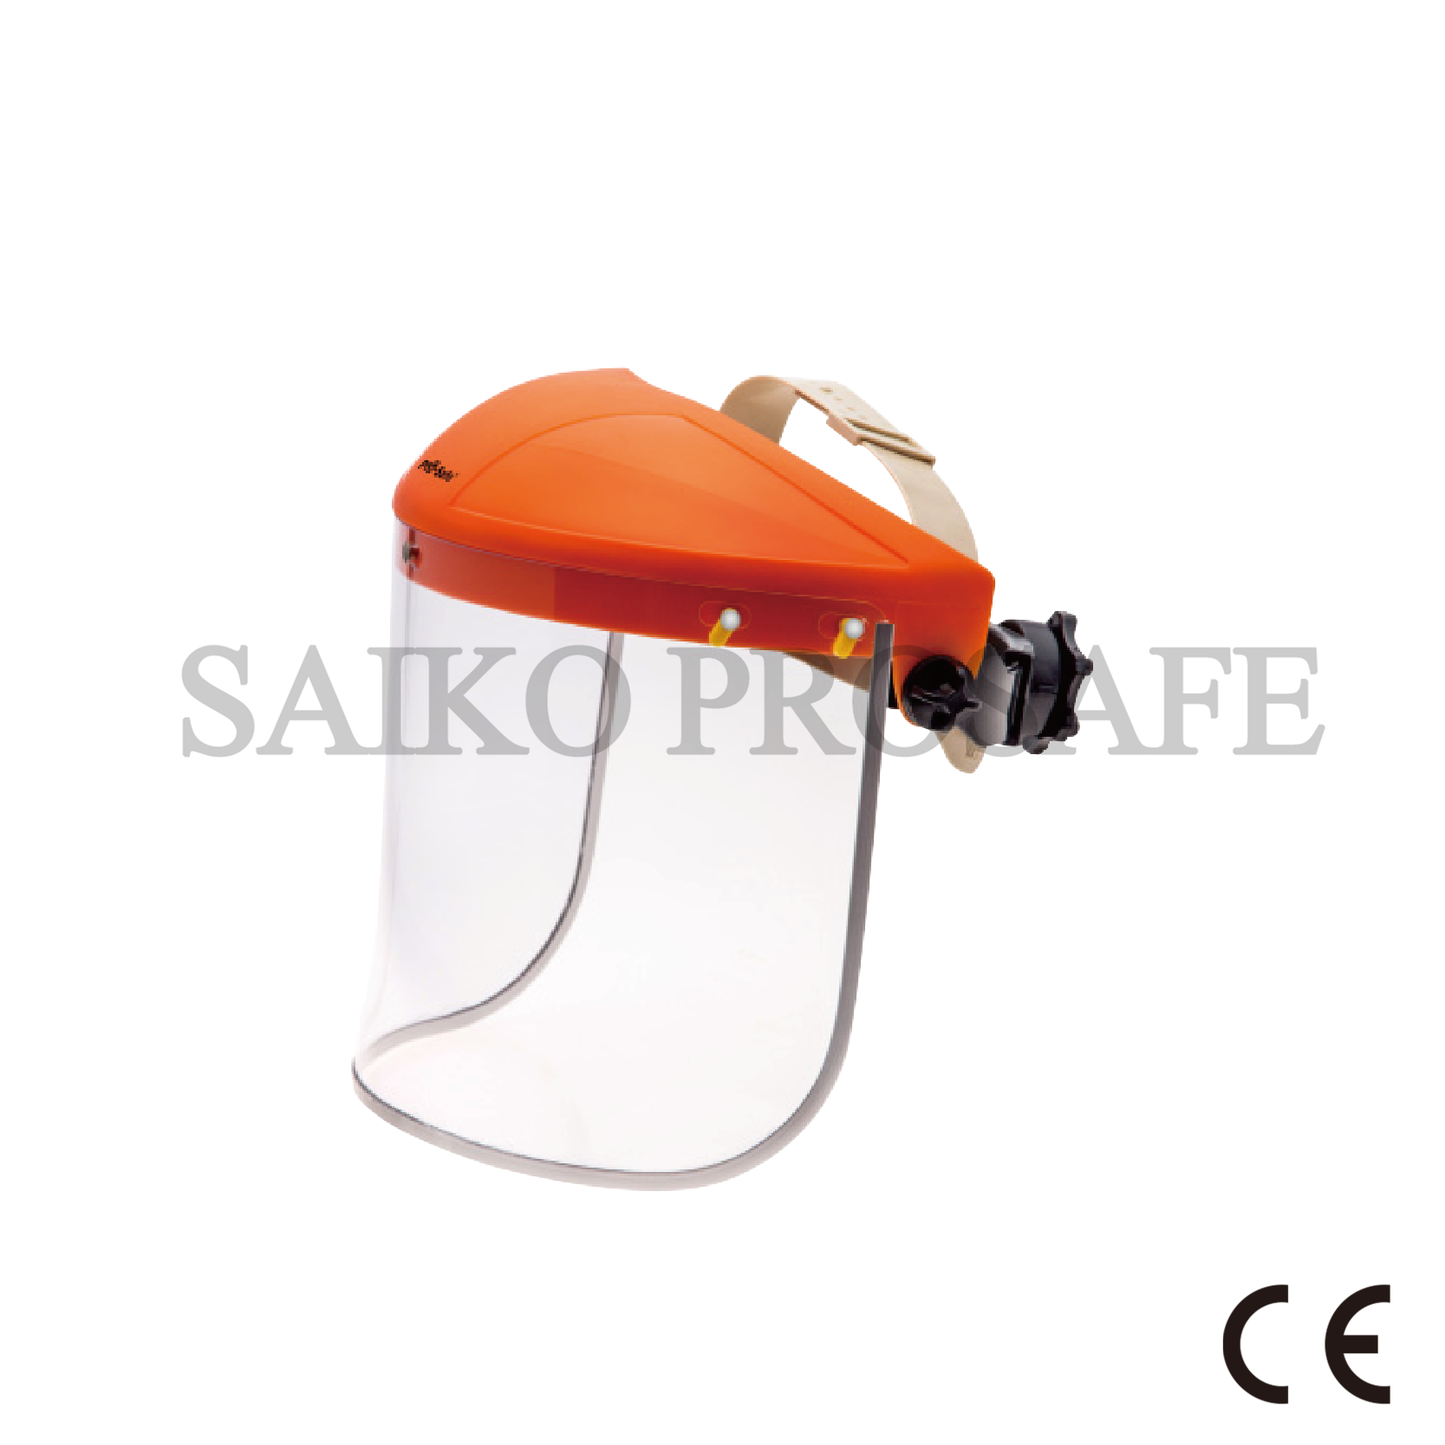 Face Shield - Clear Window with Aluminum Binding - Comfortable Ratcheting Headgear KM1504001